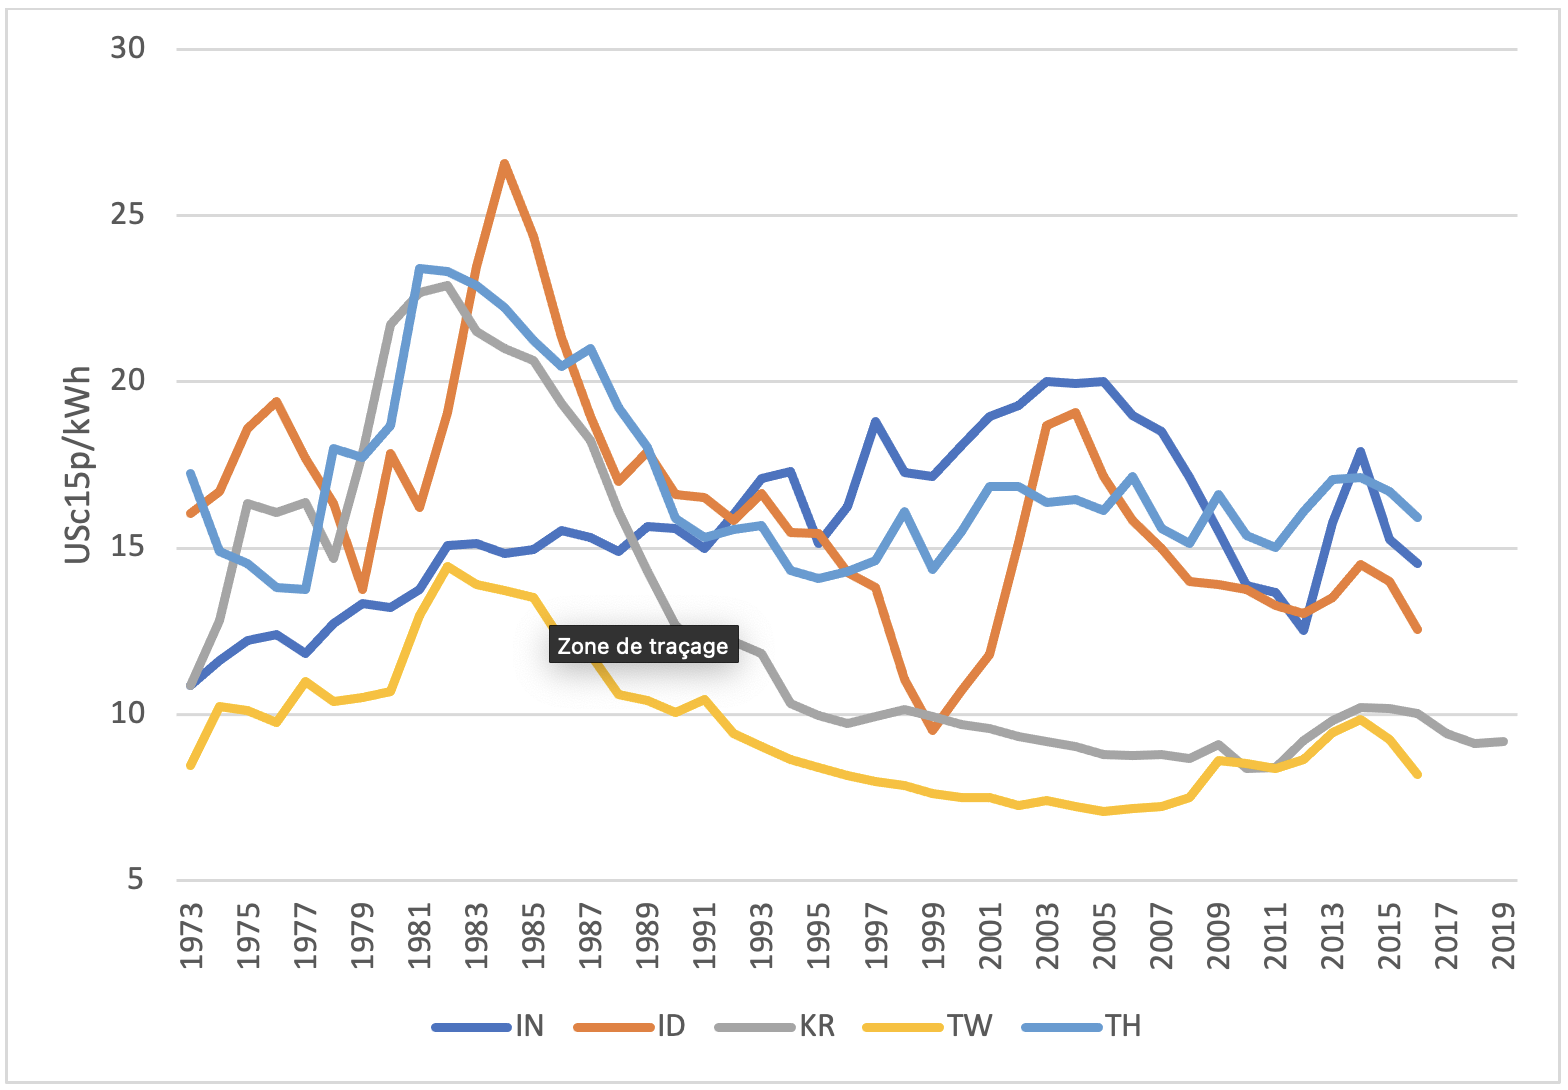 Figure 3. Economy-wide real electricity prices for five Asian countries/economies, data span 1973-2019 (unbalanced).